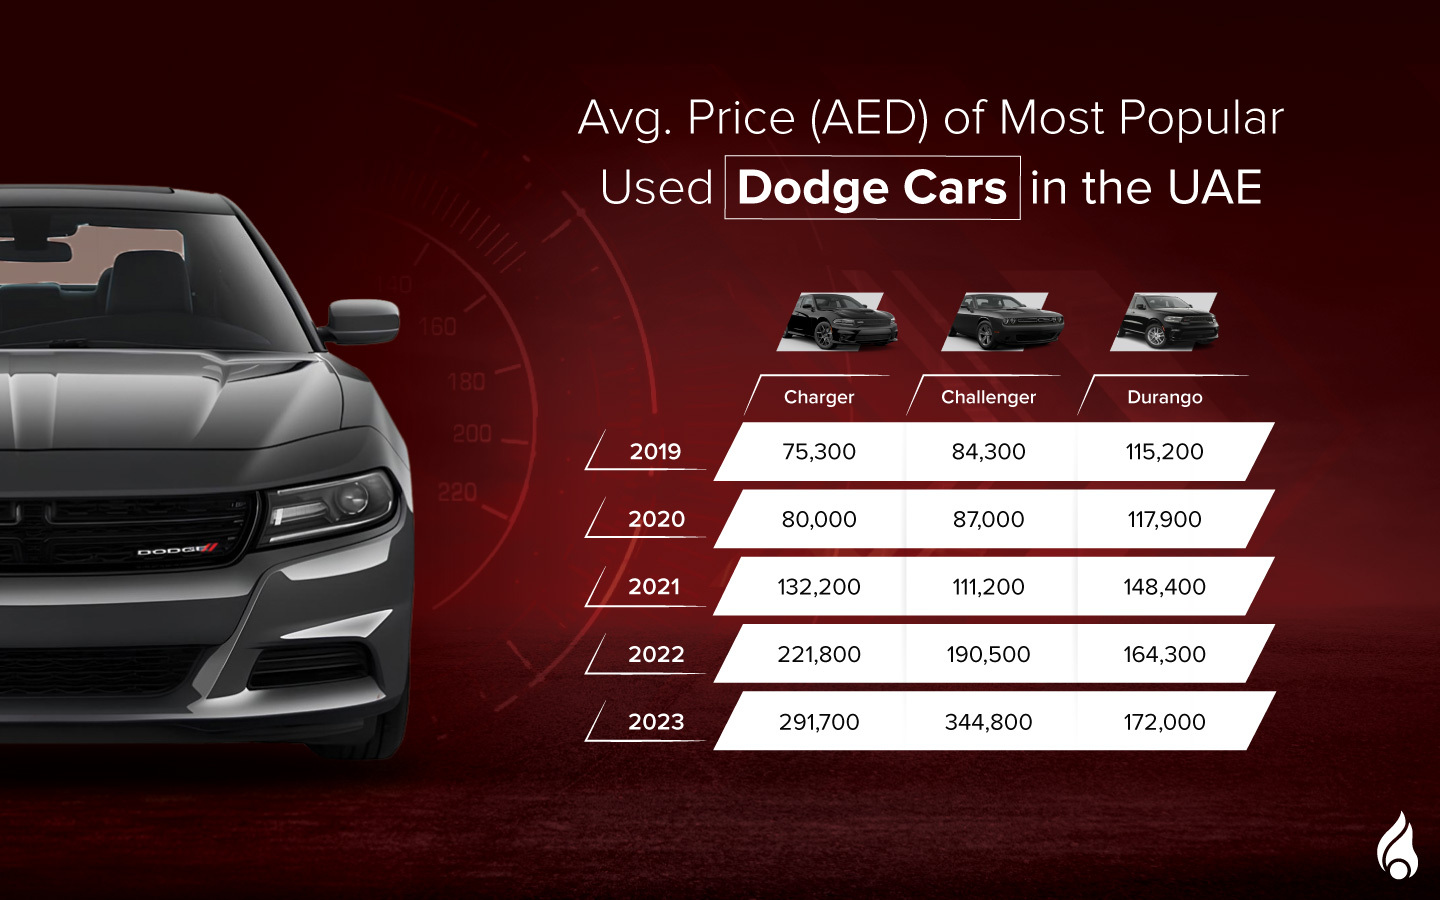 prices of most popular used Dodge cars in the UAE